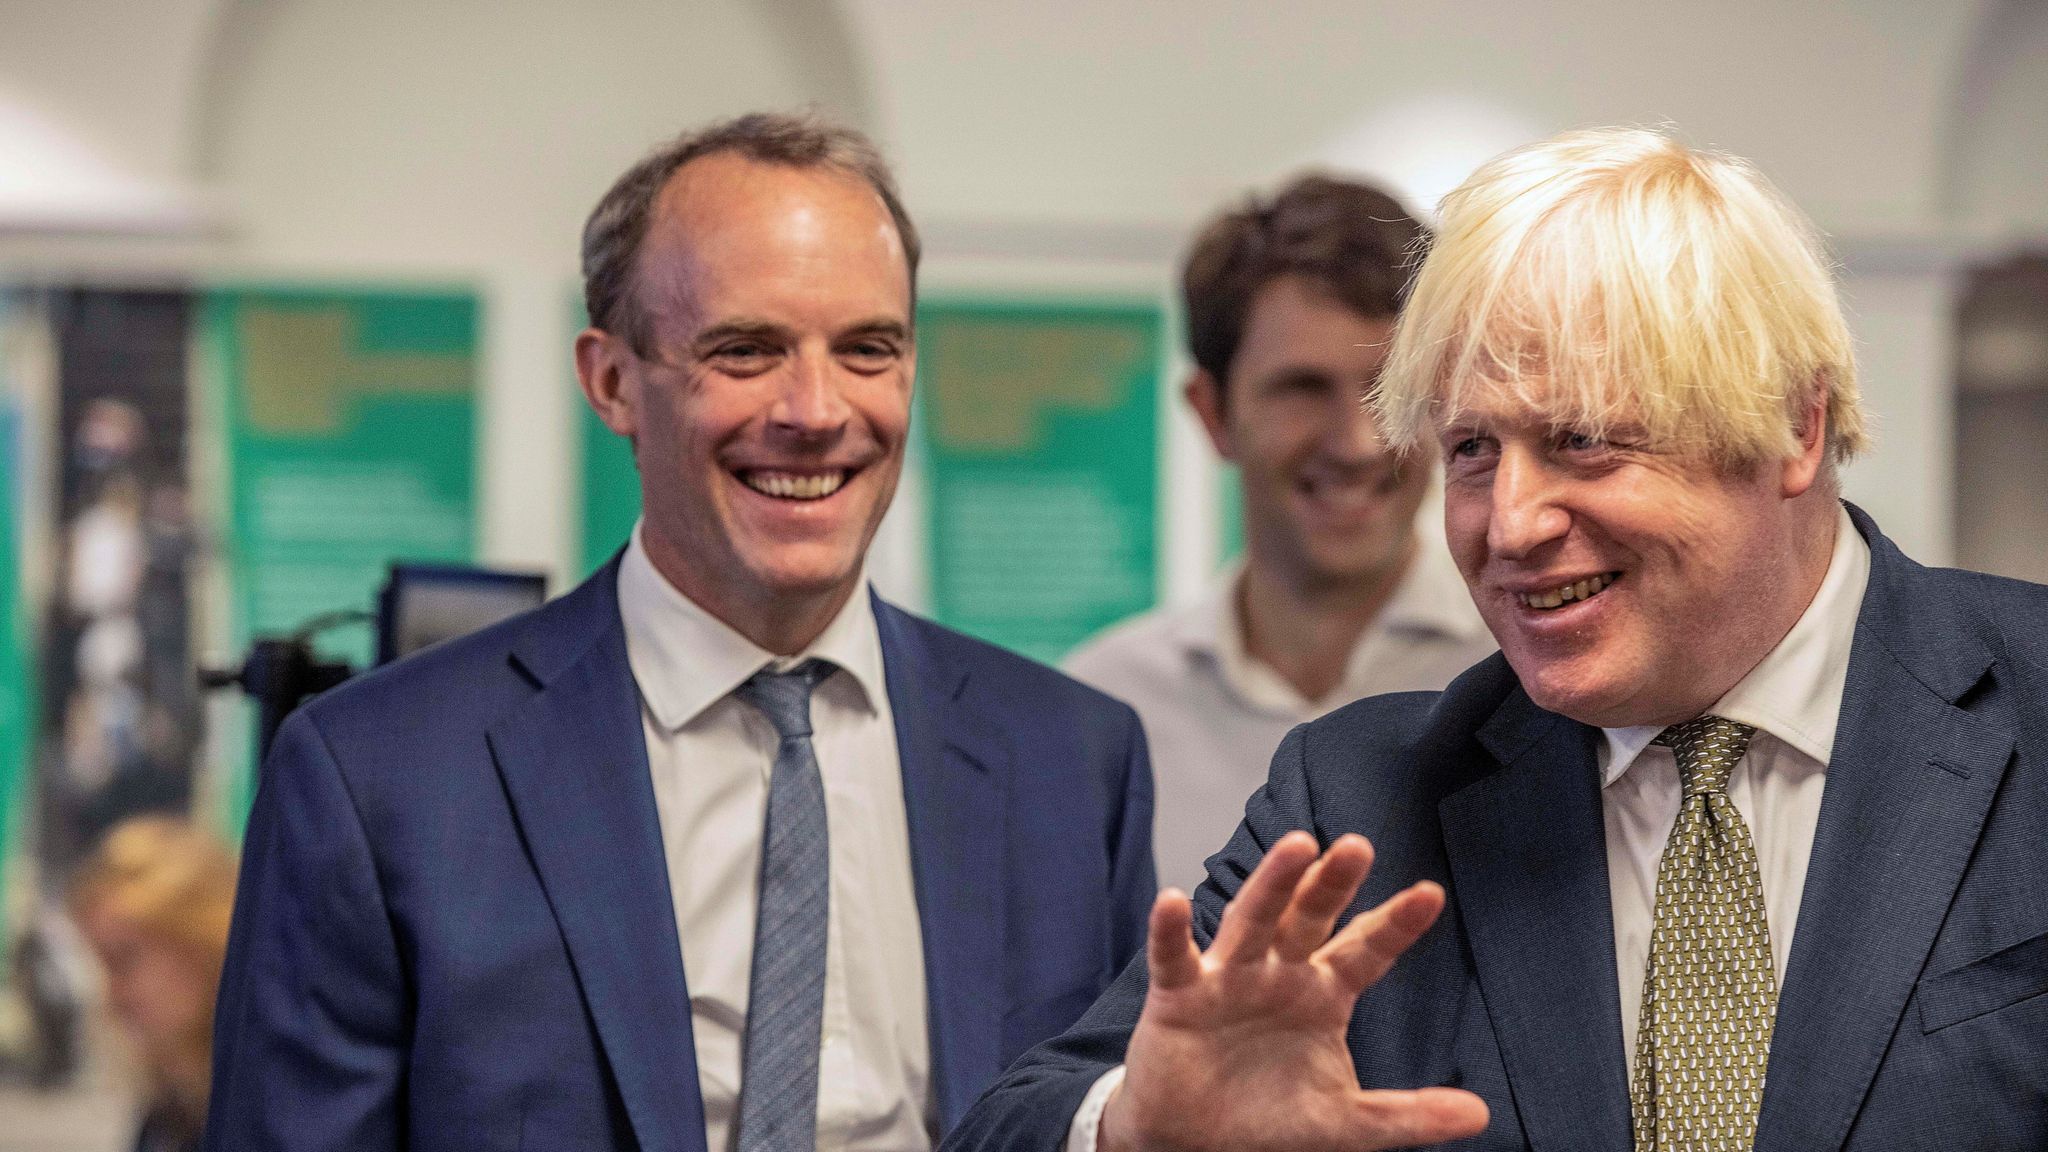 Boris Johnson 'privately warned' Dominic Raab about conduct - as bullying inquiry end in sight